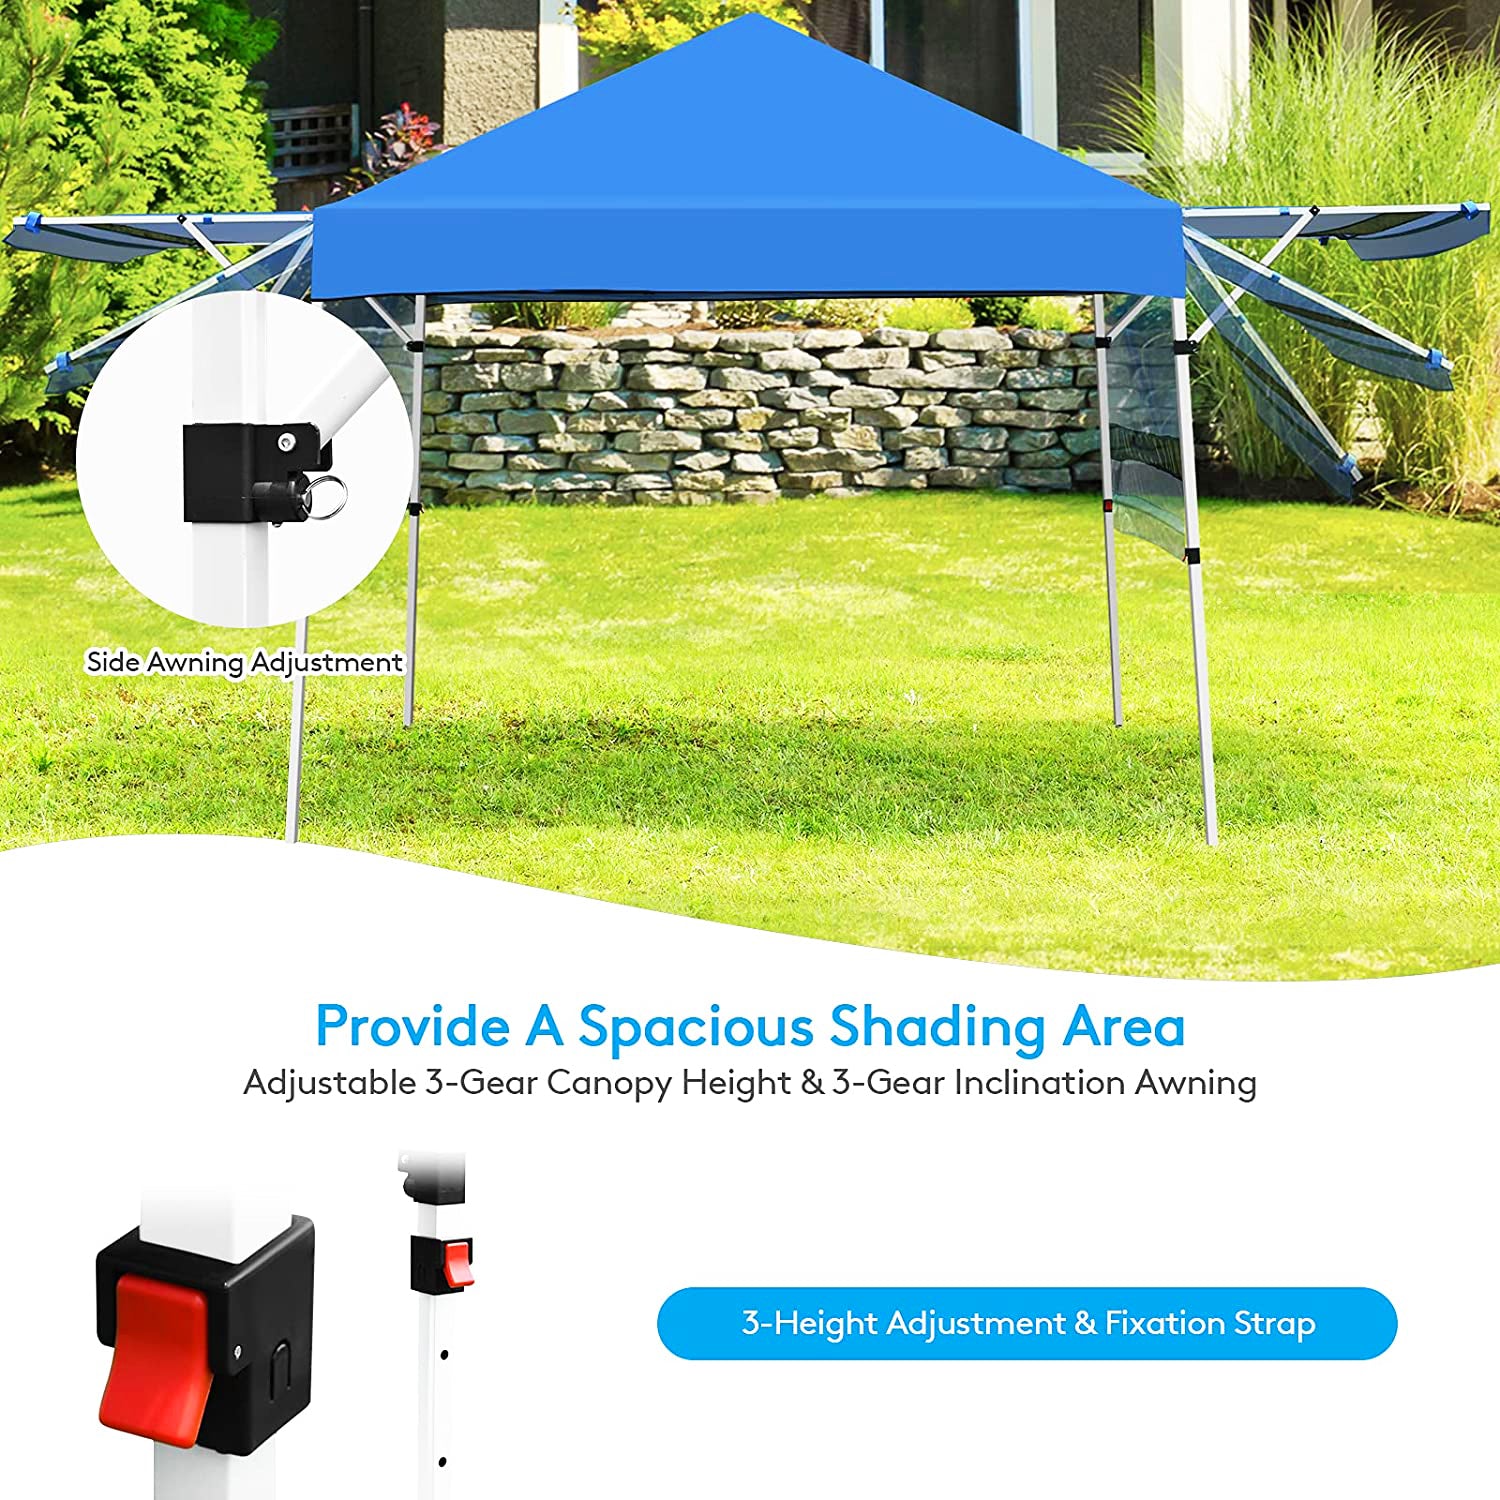 17 ft. x 10 ft. Blue Pop-Up Canopy with Adjustable Instant Sun Shelter and Carrying Bag